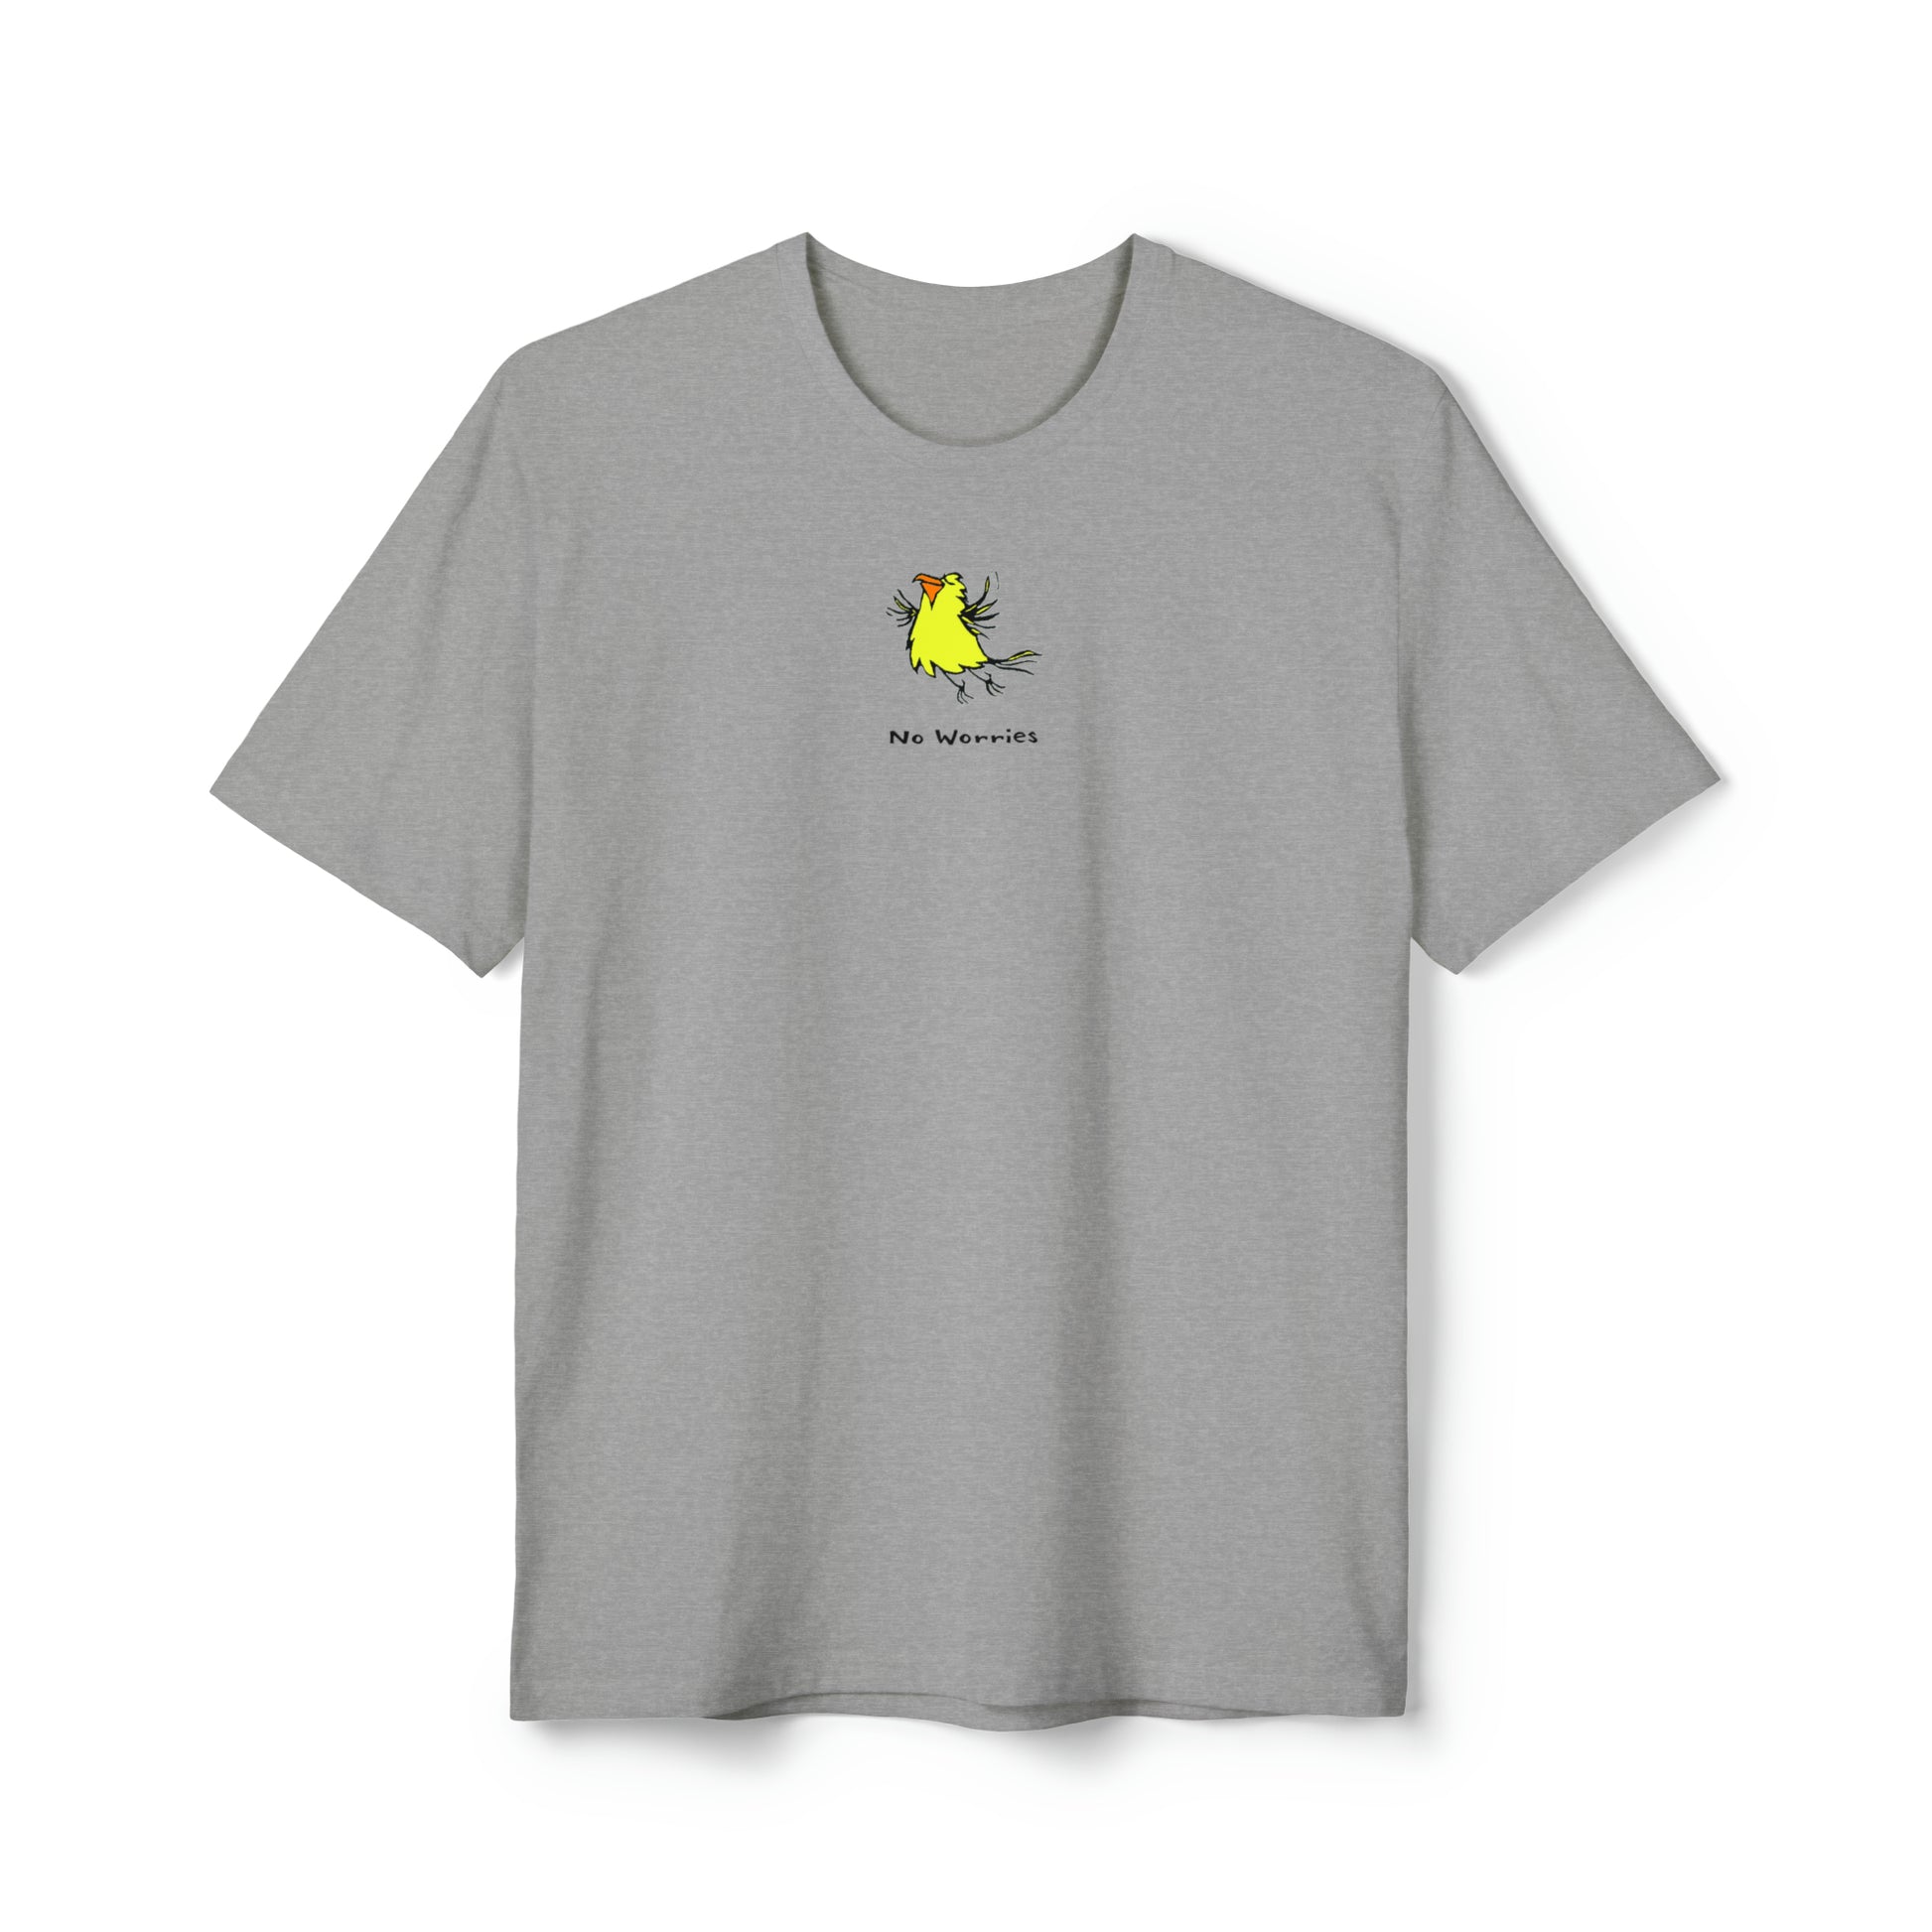 Yellow flying bird with orange beak on light heather grey color recycled unisex men's t-shirt. Text under image says No Worries